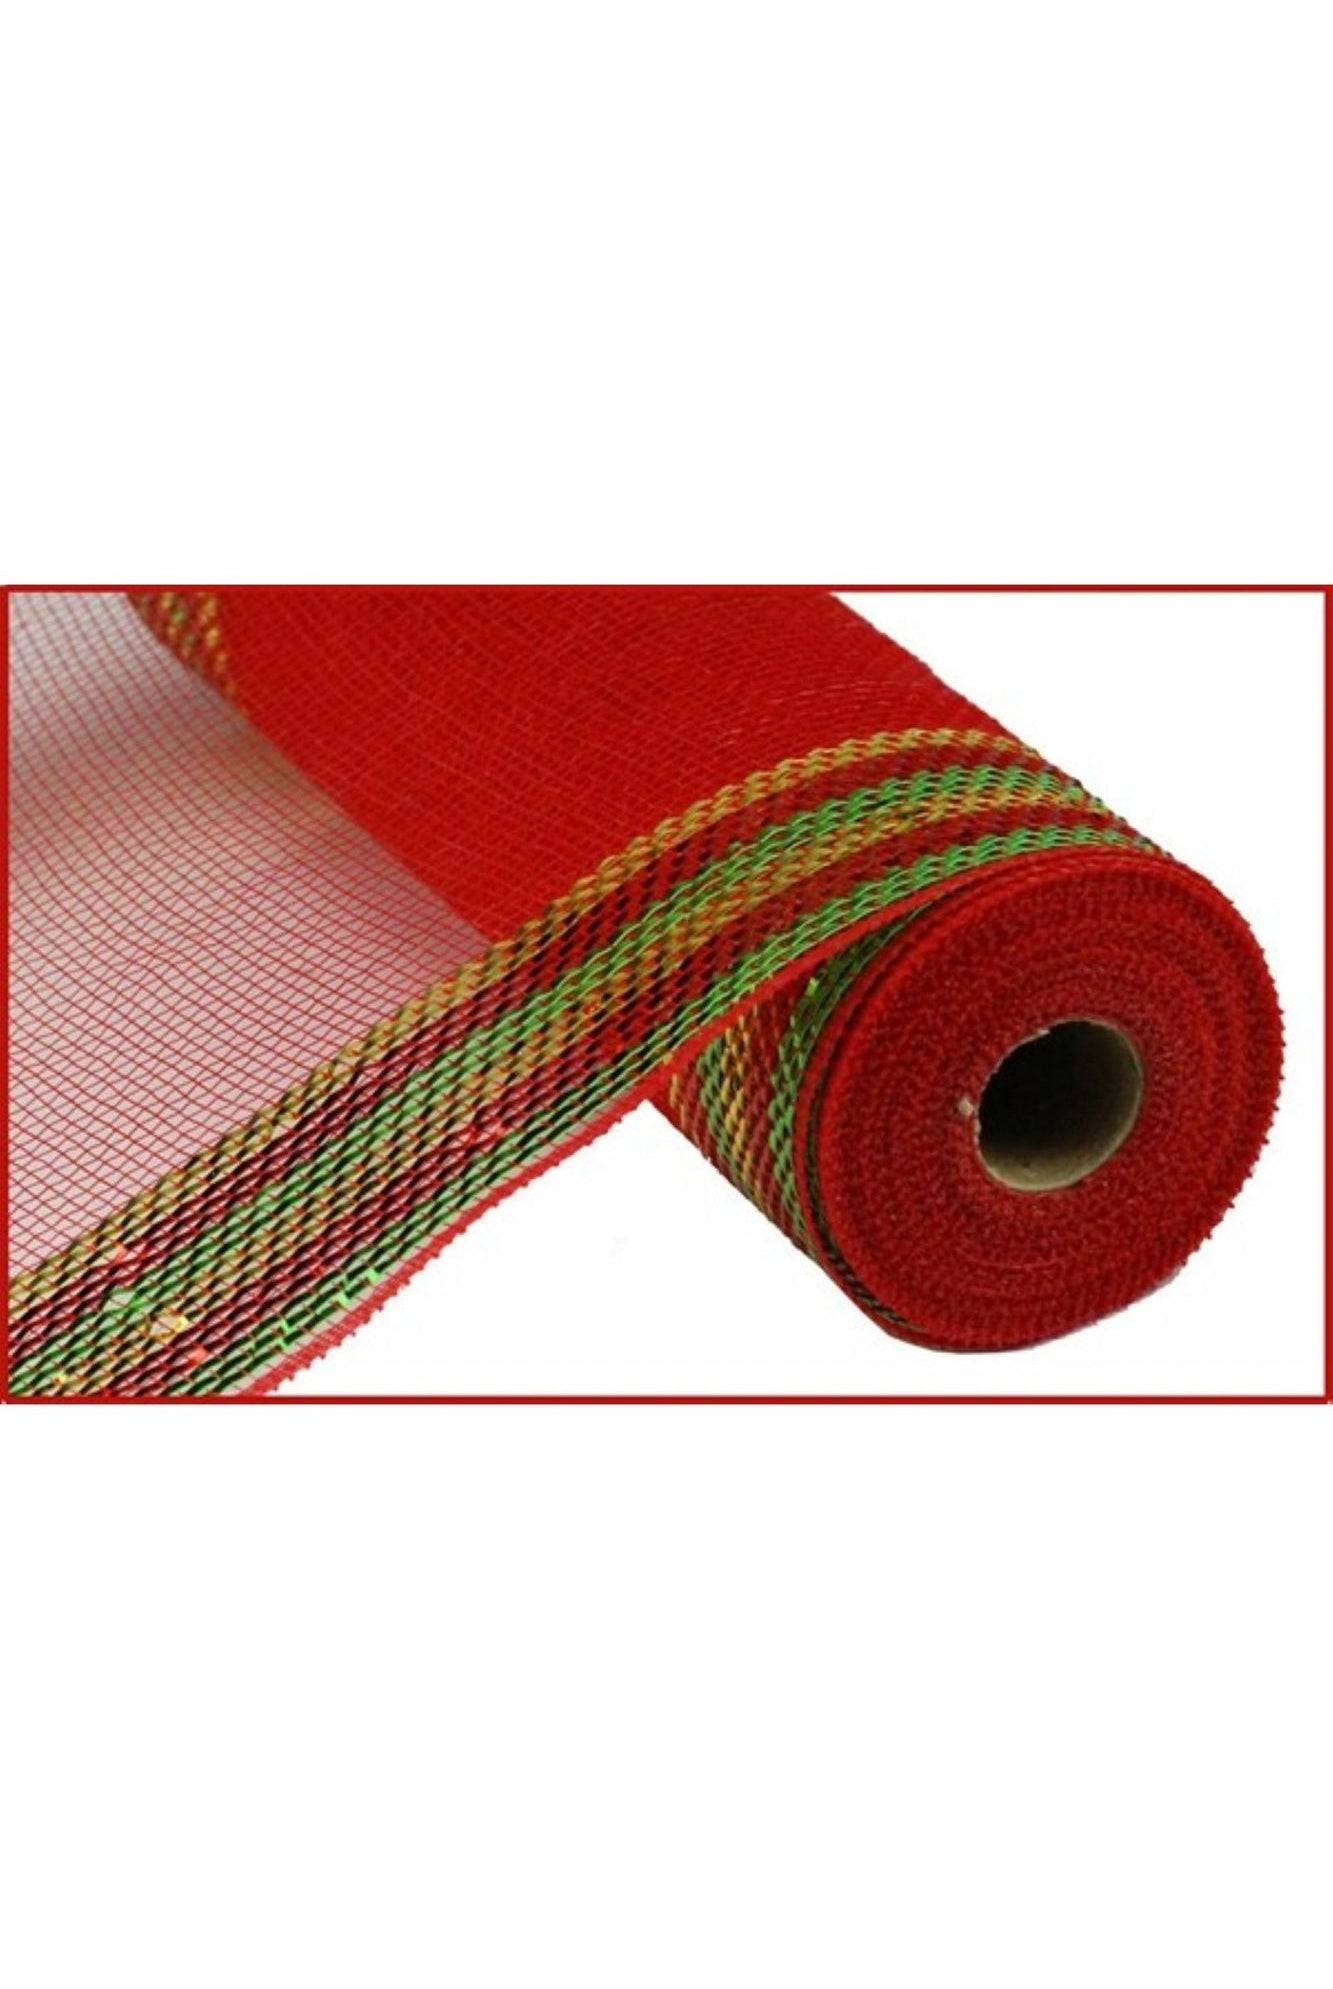 10.5" Border Stripe Metallic Mesh: Red/Lime/Gold (10 Yards) - Michelle's aDOORable Creations - Poly Deco Mesh